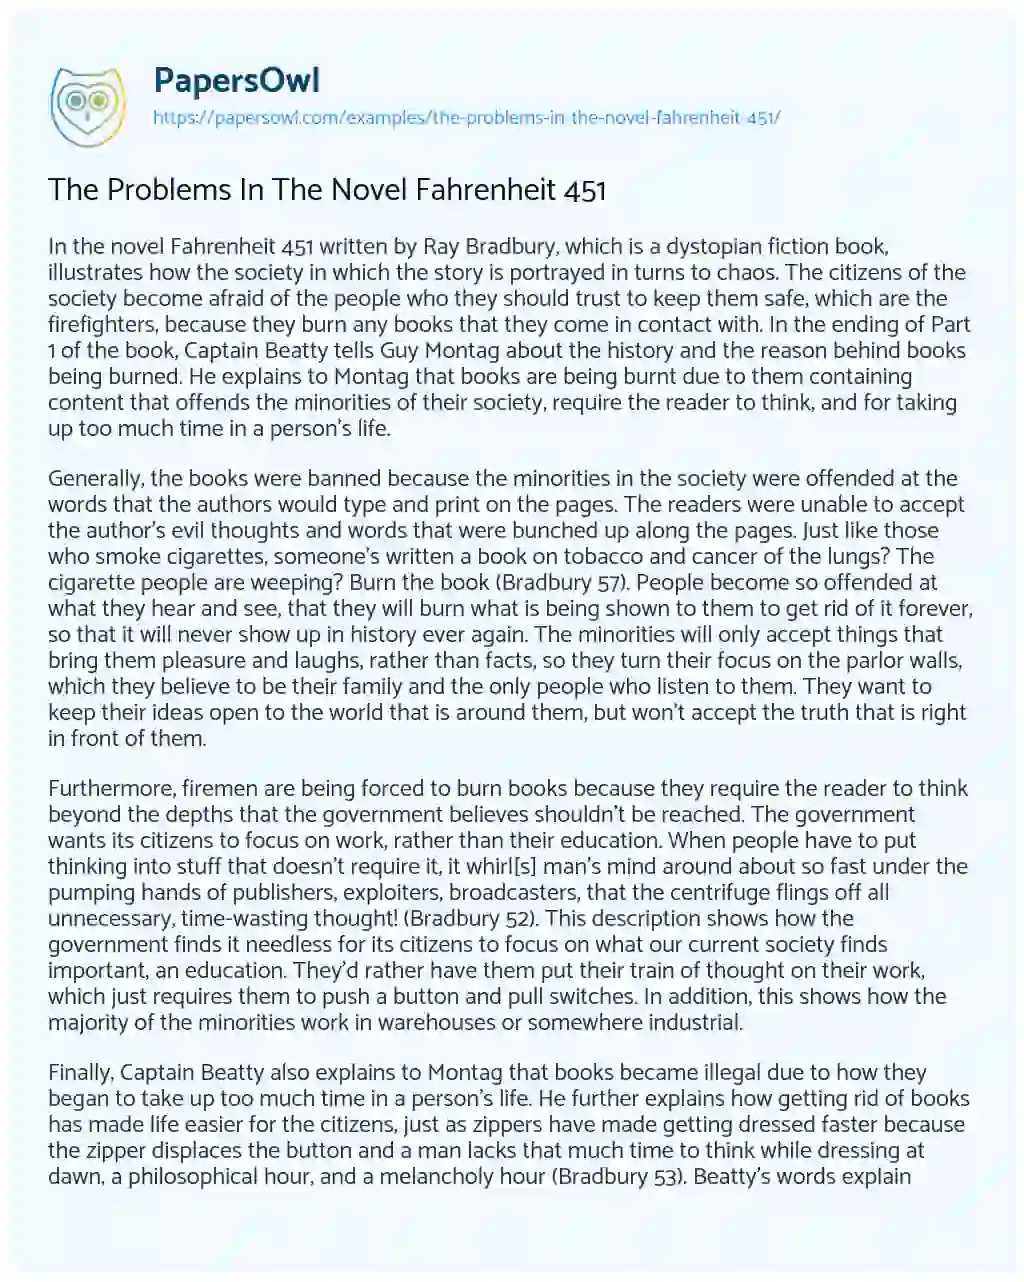 The Problems in the Novel Fahrenheit 451 essay